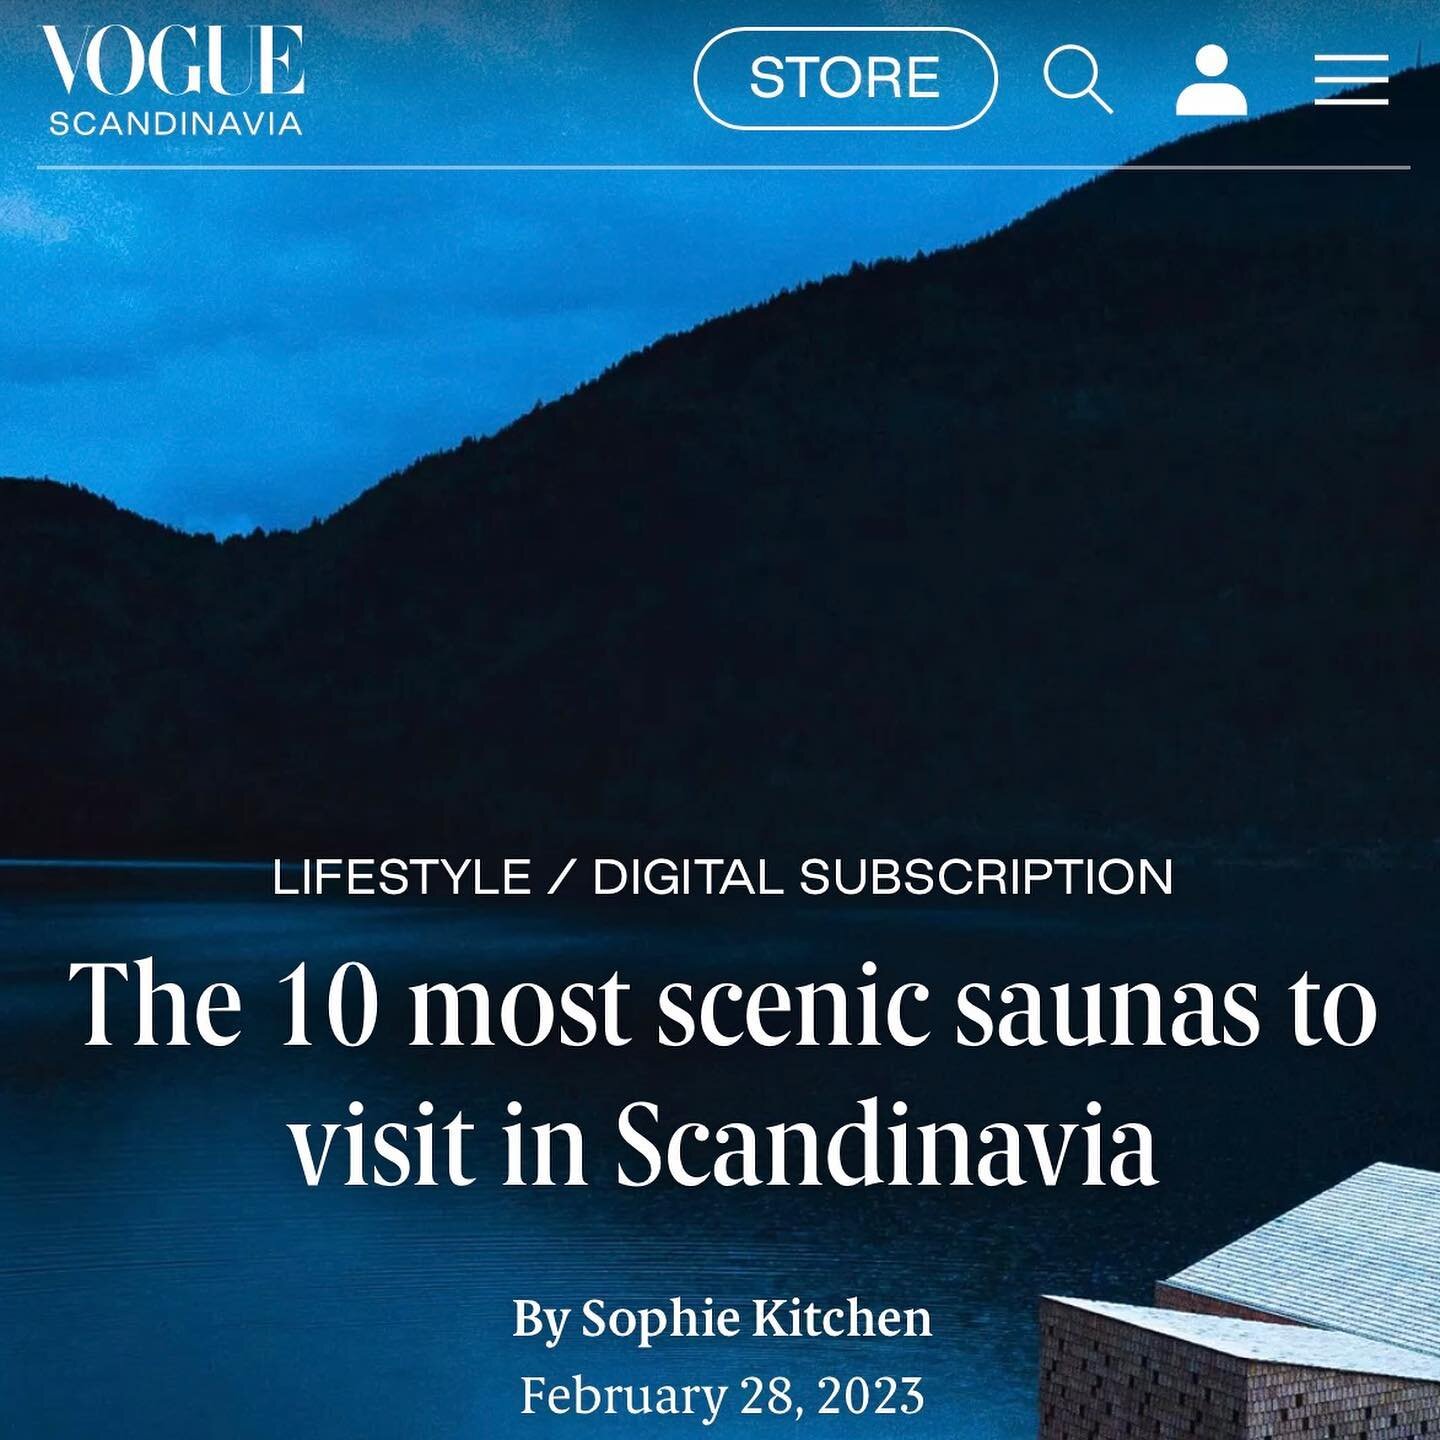 The floating sauna Skarven designed by @zeuthenstjern in very good company in @voguescandinavia

We have designed a danish sister that will arrive in another scenic location later this year @hejlsmindehavnebad 🧜🏼🧜🏻&zwj;♀️